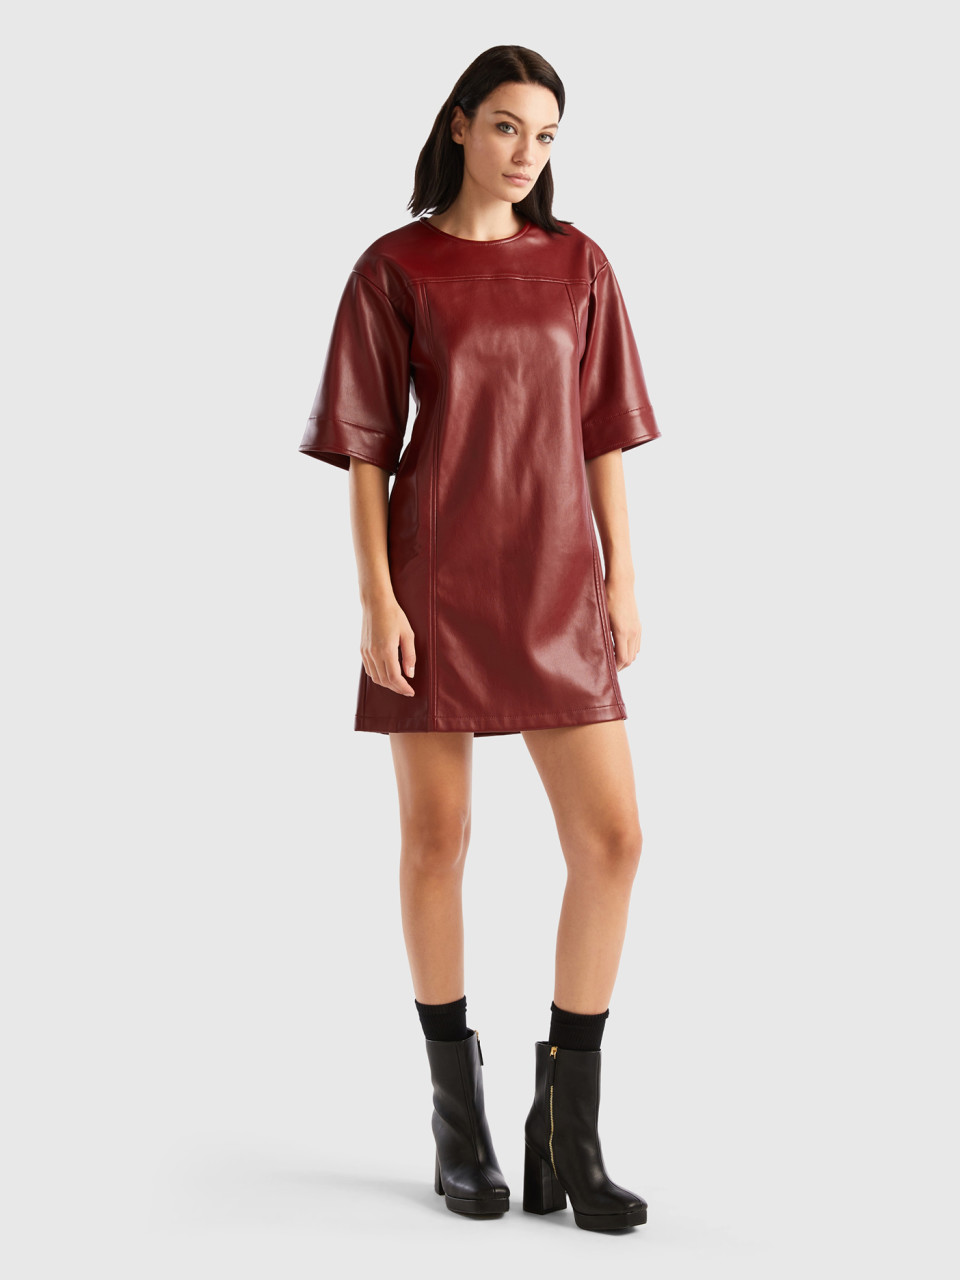 Benetton, Cropped Dress In Imitation Leather Fabric, Burgundy, Women